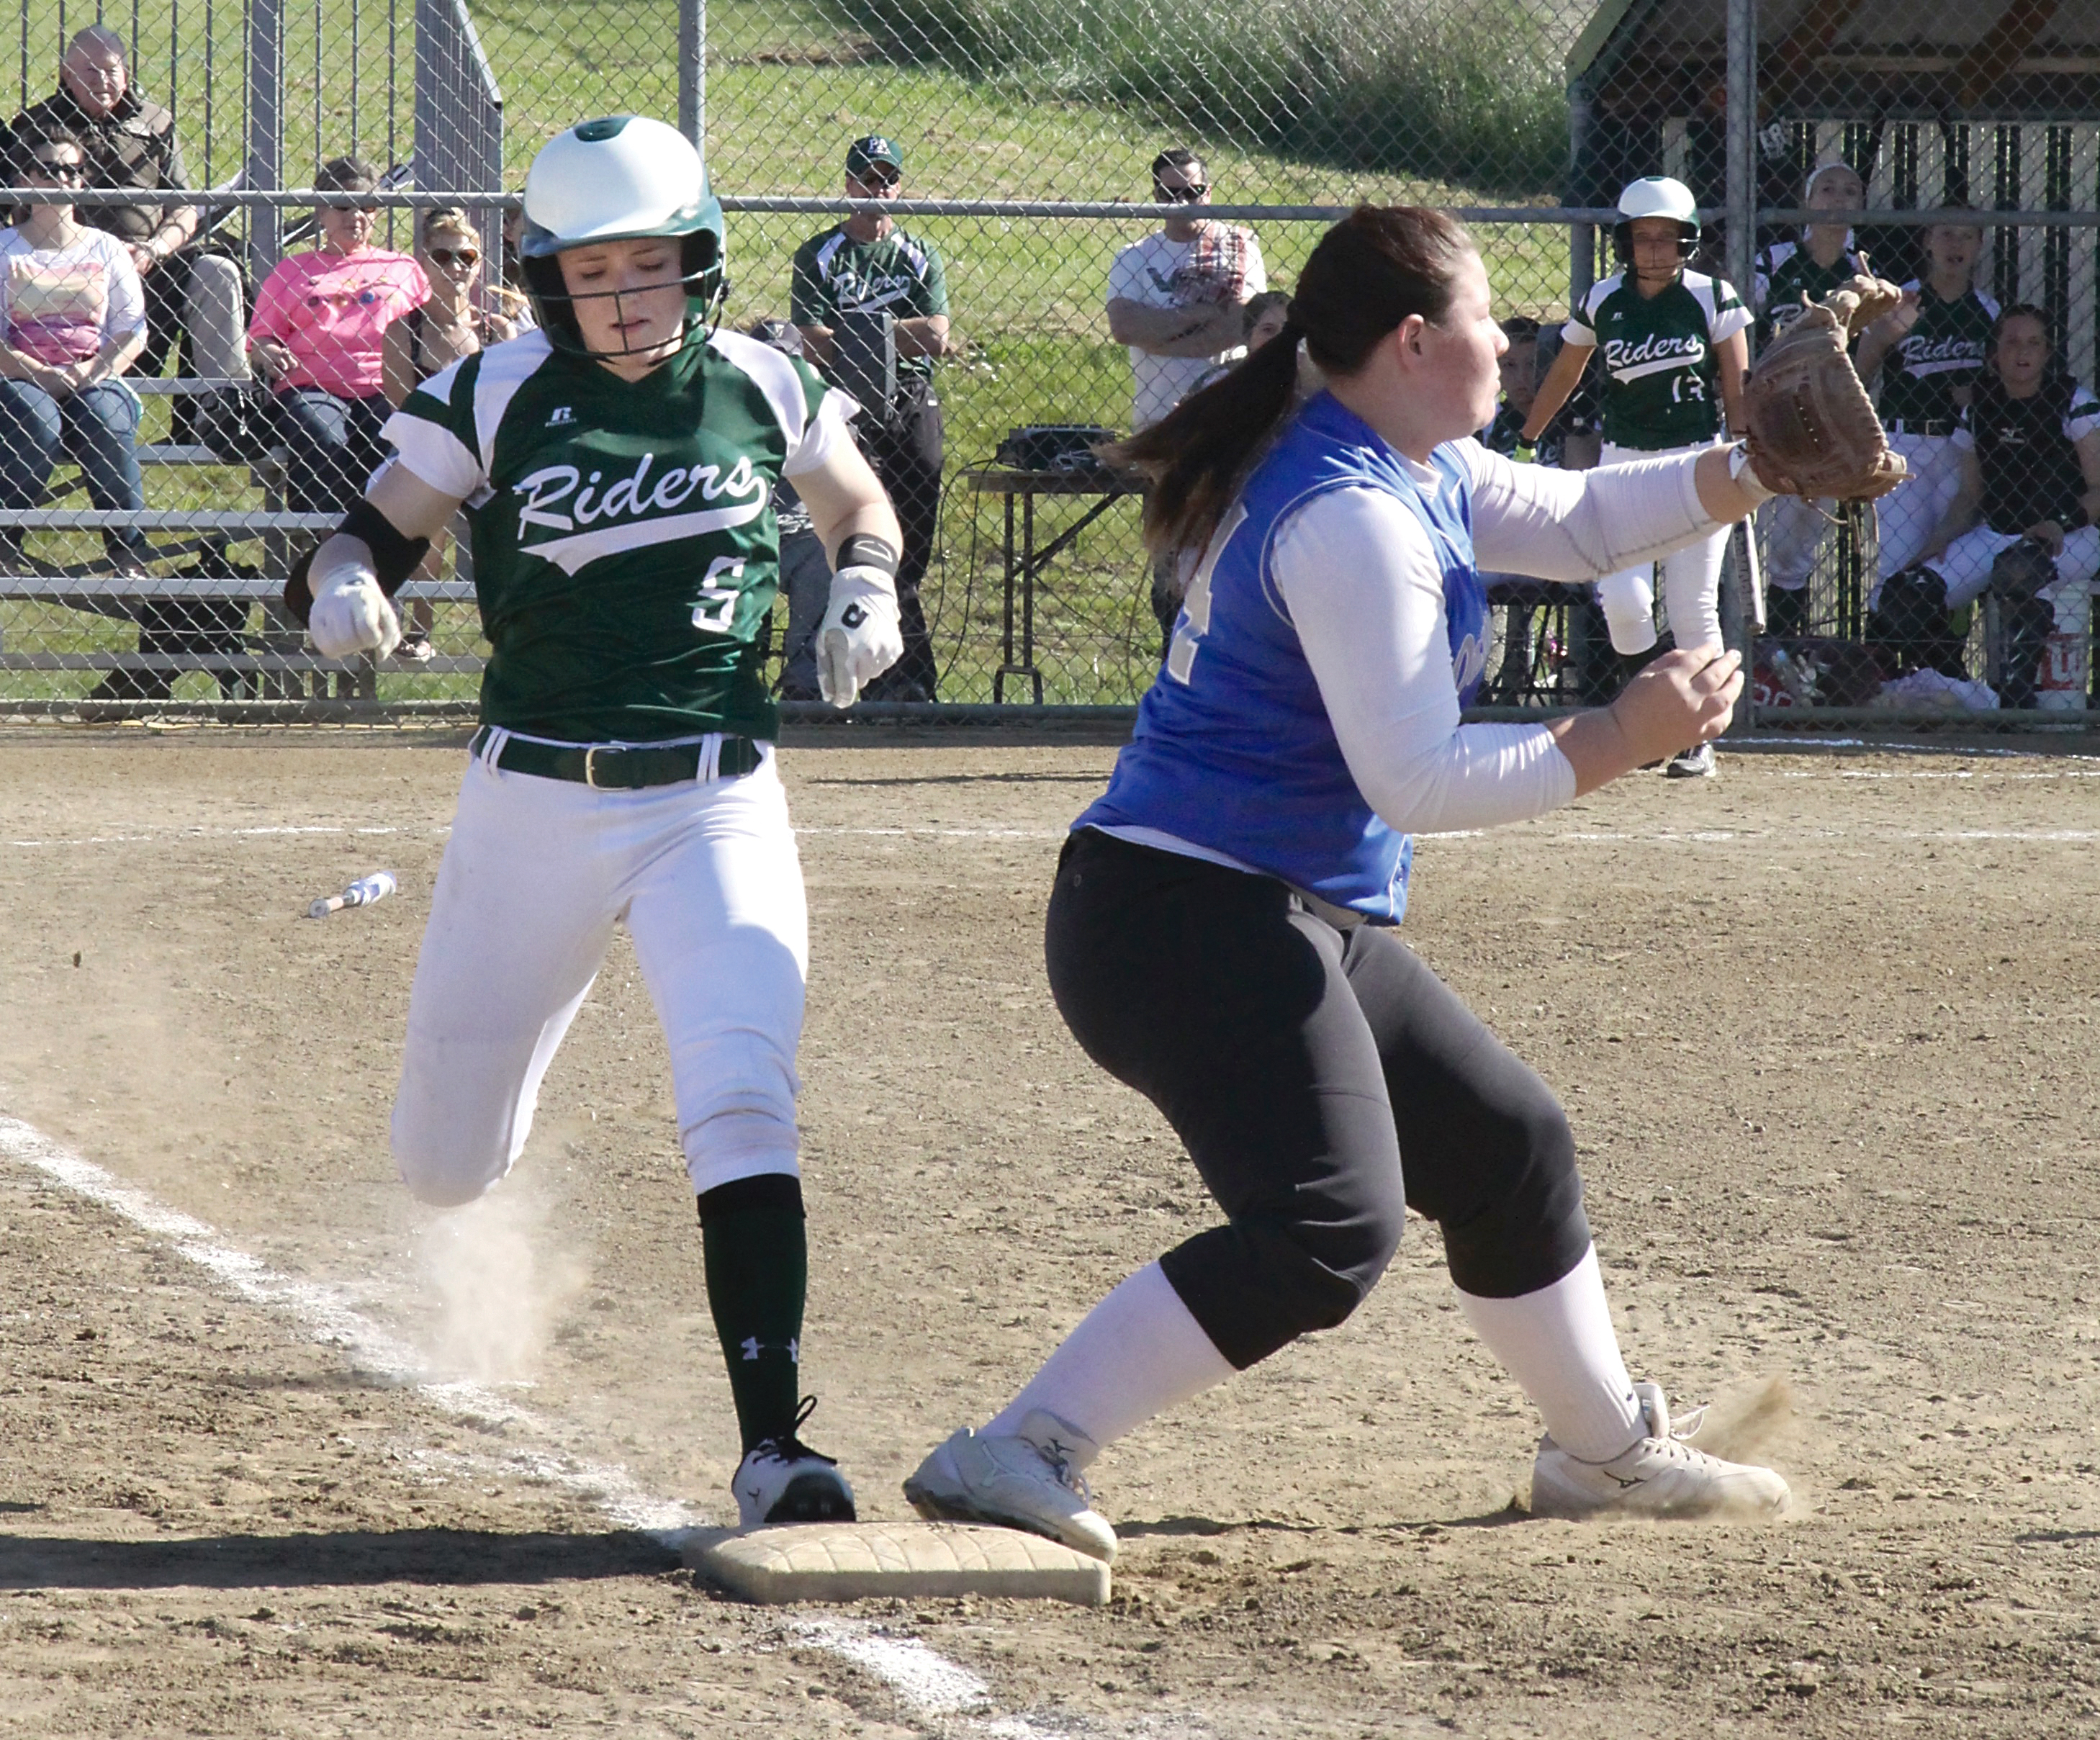 Port Angeles' Carly Gouge steps on first base before the ball reaches Olympic first baseman Sage Scott. (Dave Logan/for Peninsula Daily News)